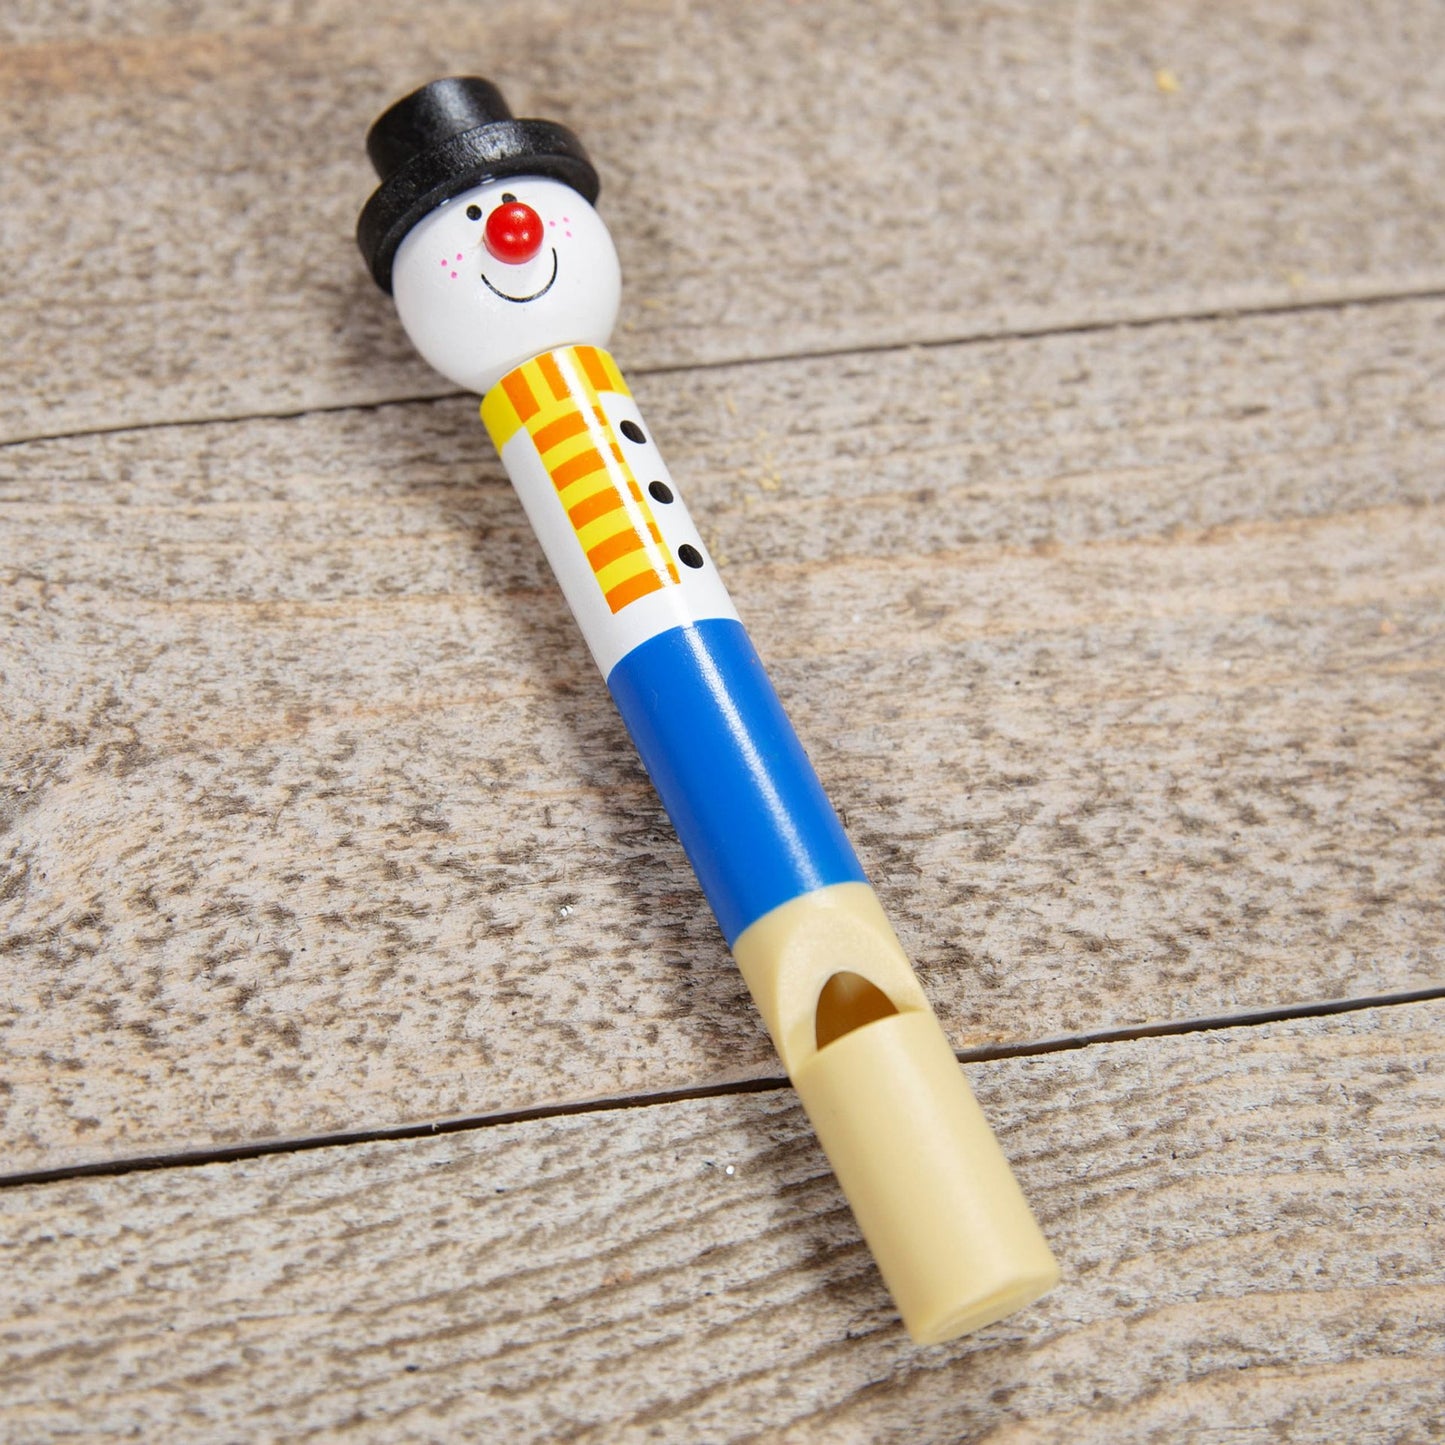 Wooden Christmas Snowman Whistle - Stocking Fillers